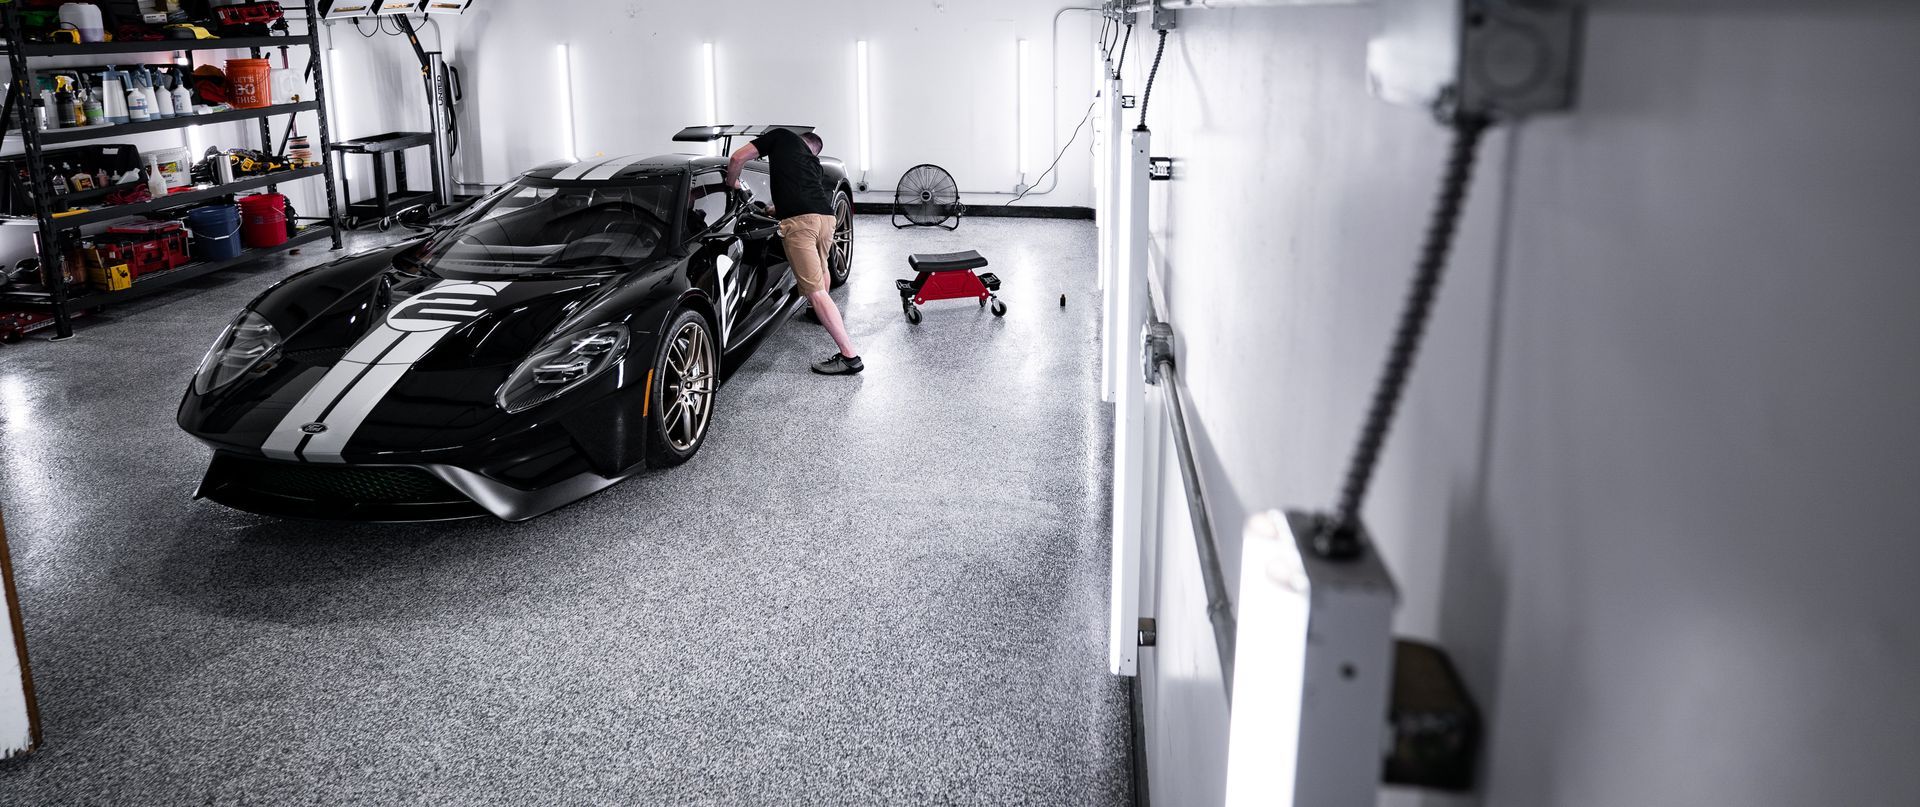 2018 Ford GT Heritage Edition getting paint protection film and ceramic coating application